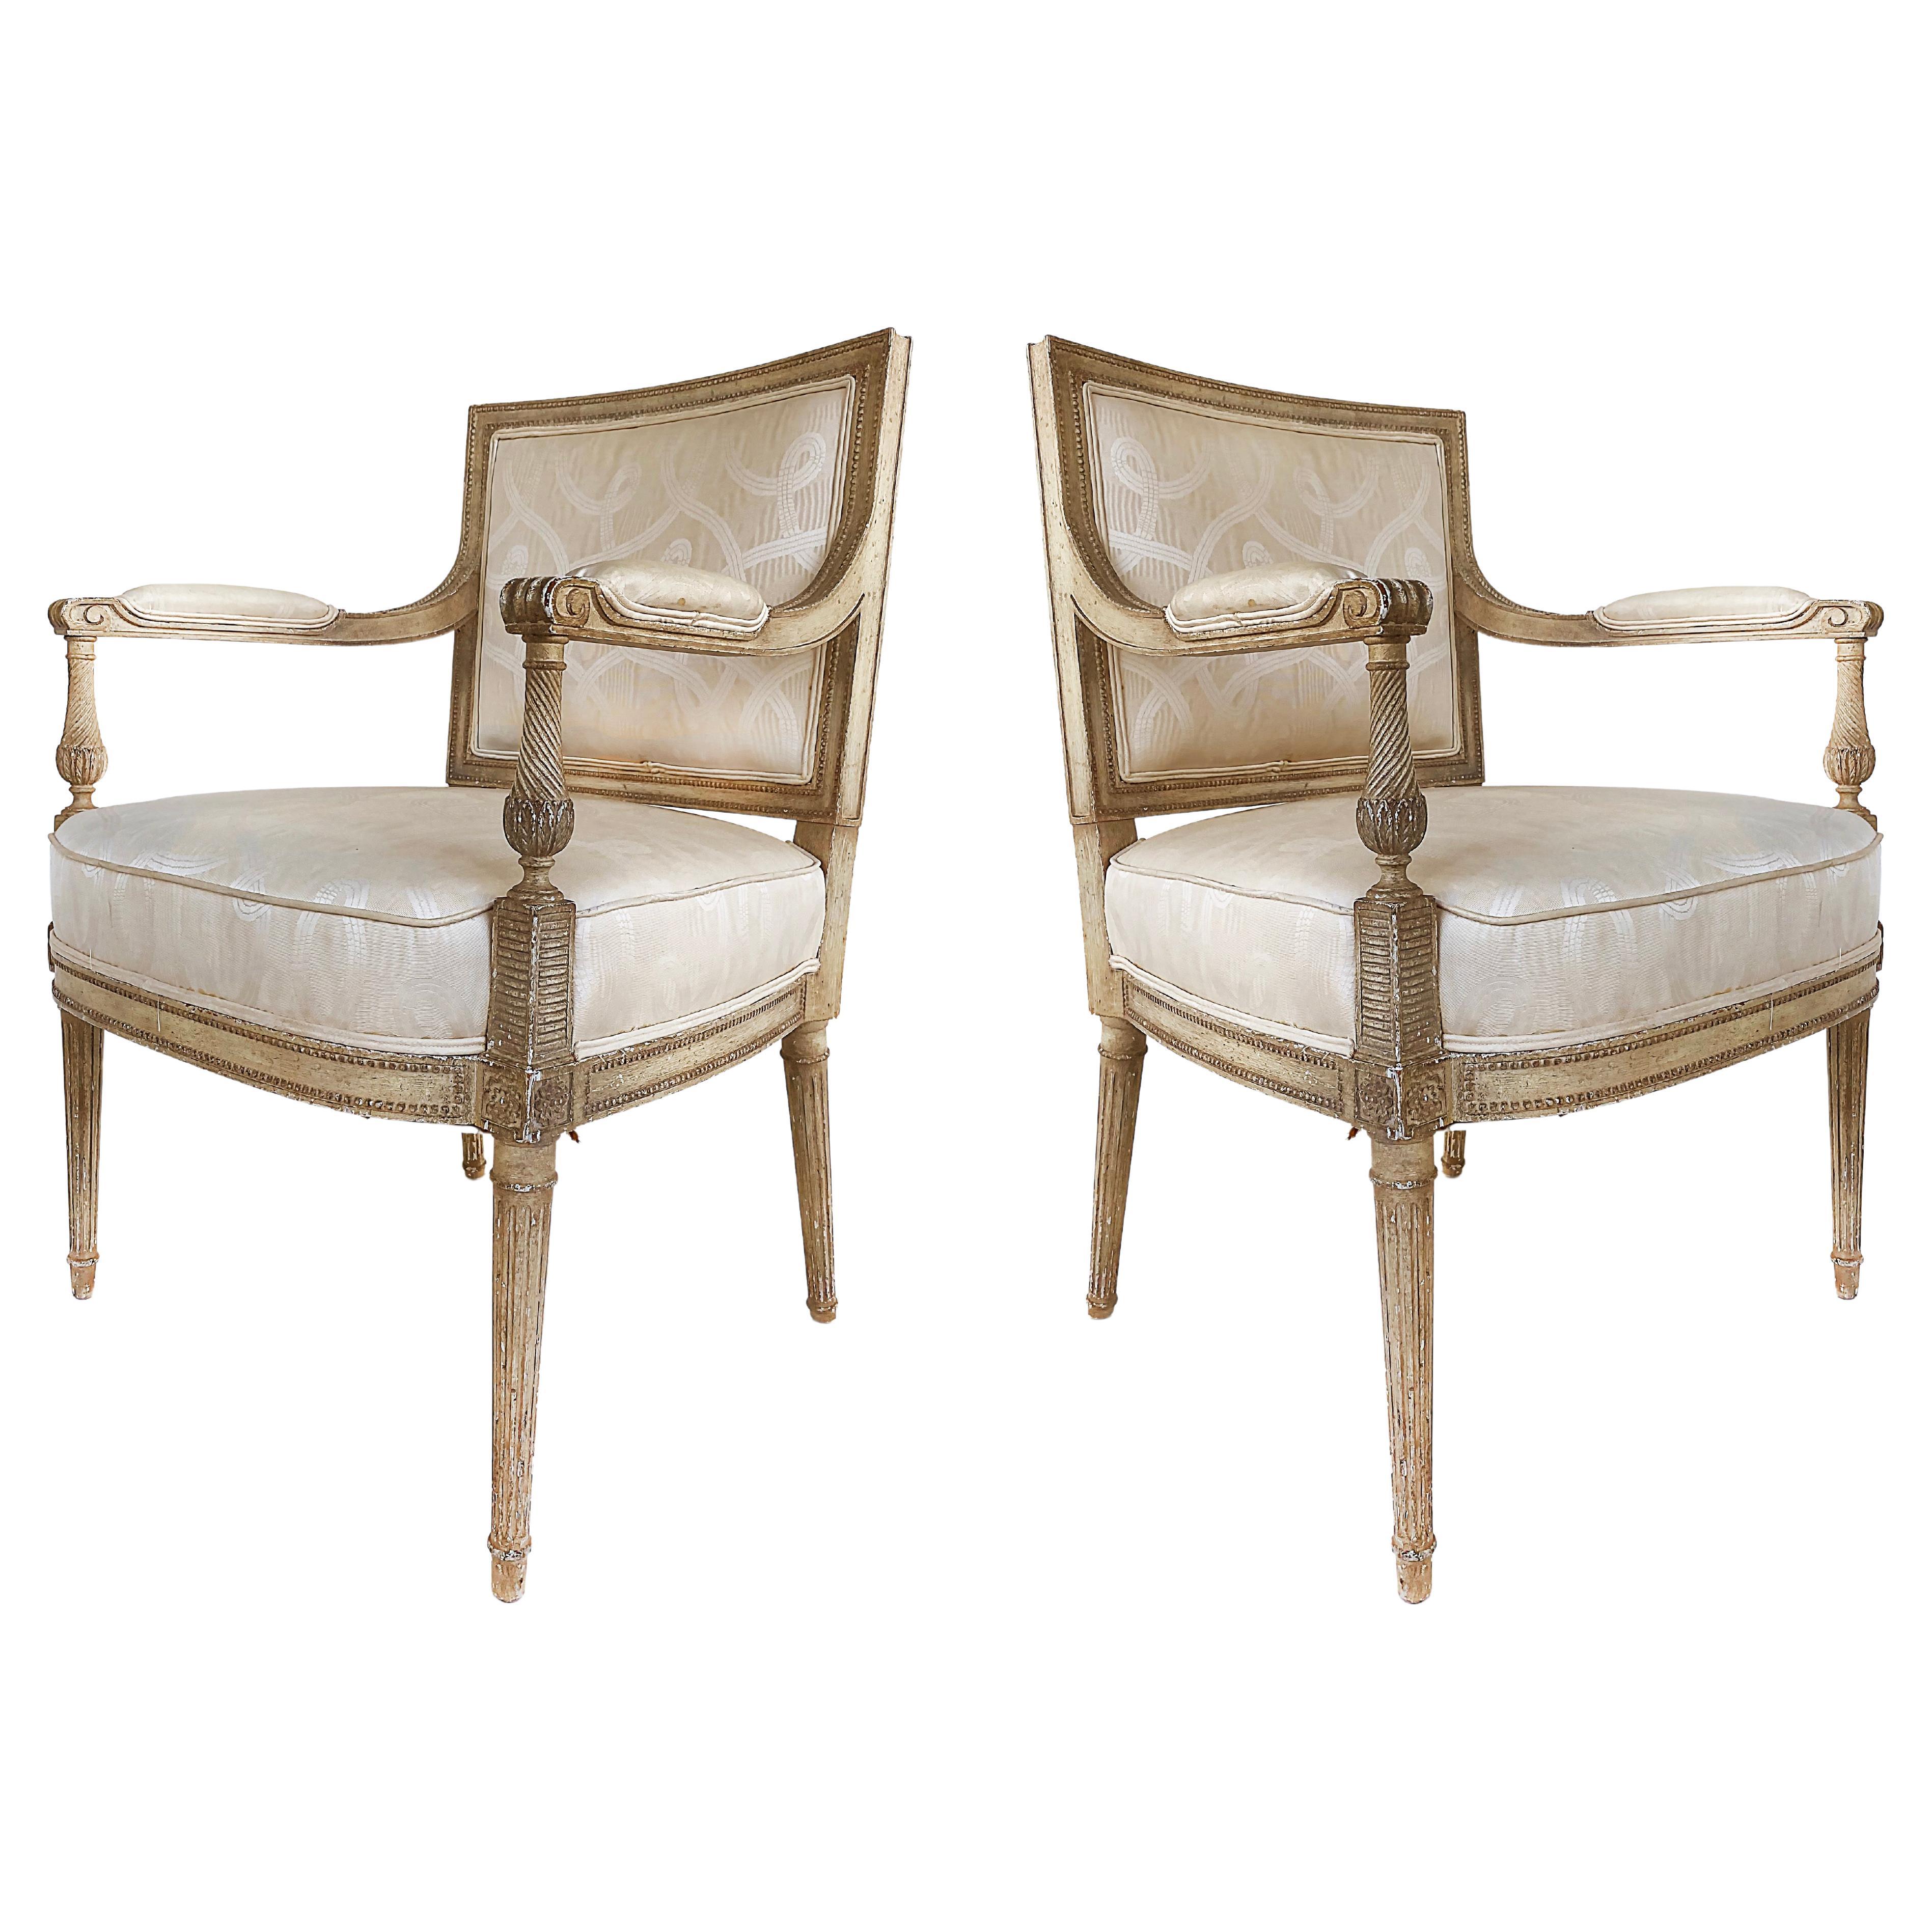 French Louis XVI Style Painted Fauteuil Armchairs, Late 19th Century -Early 20th For Sale